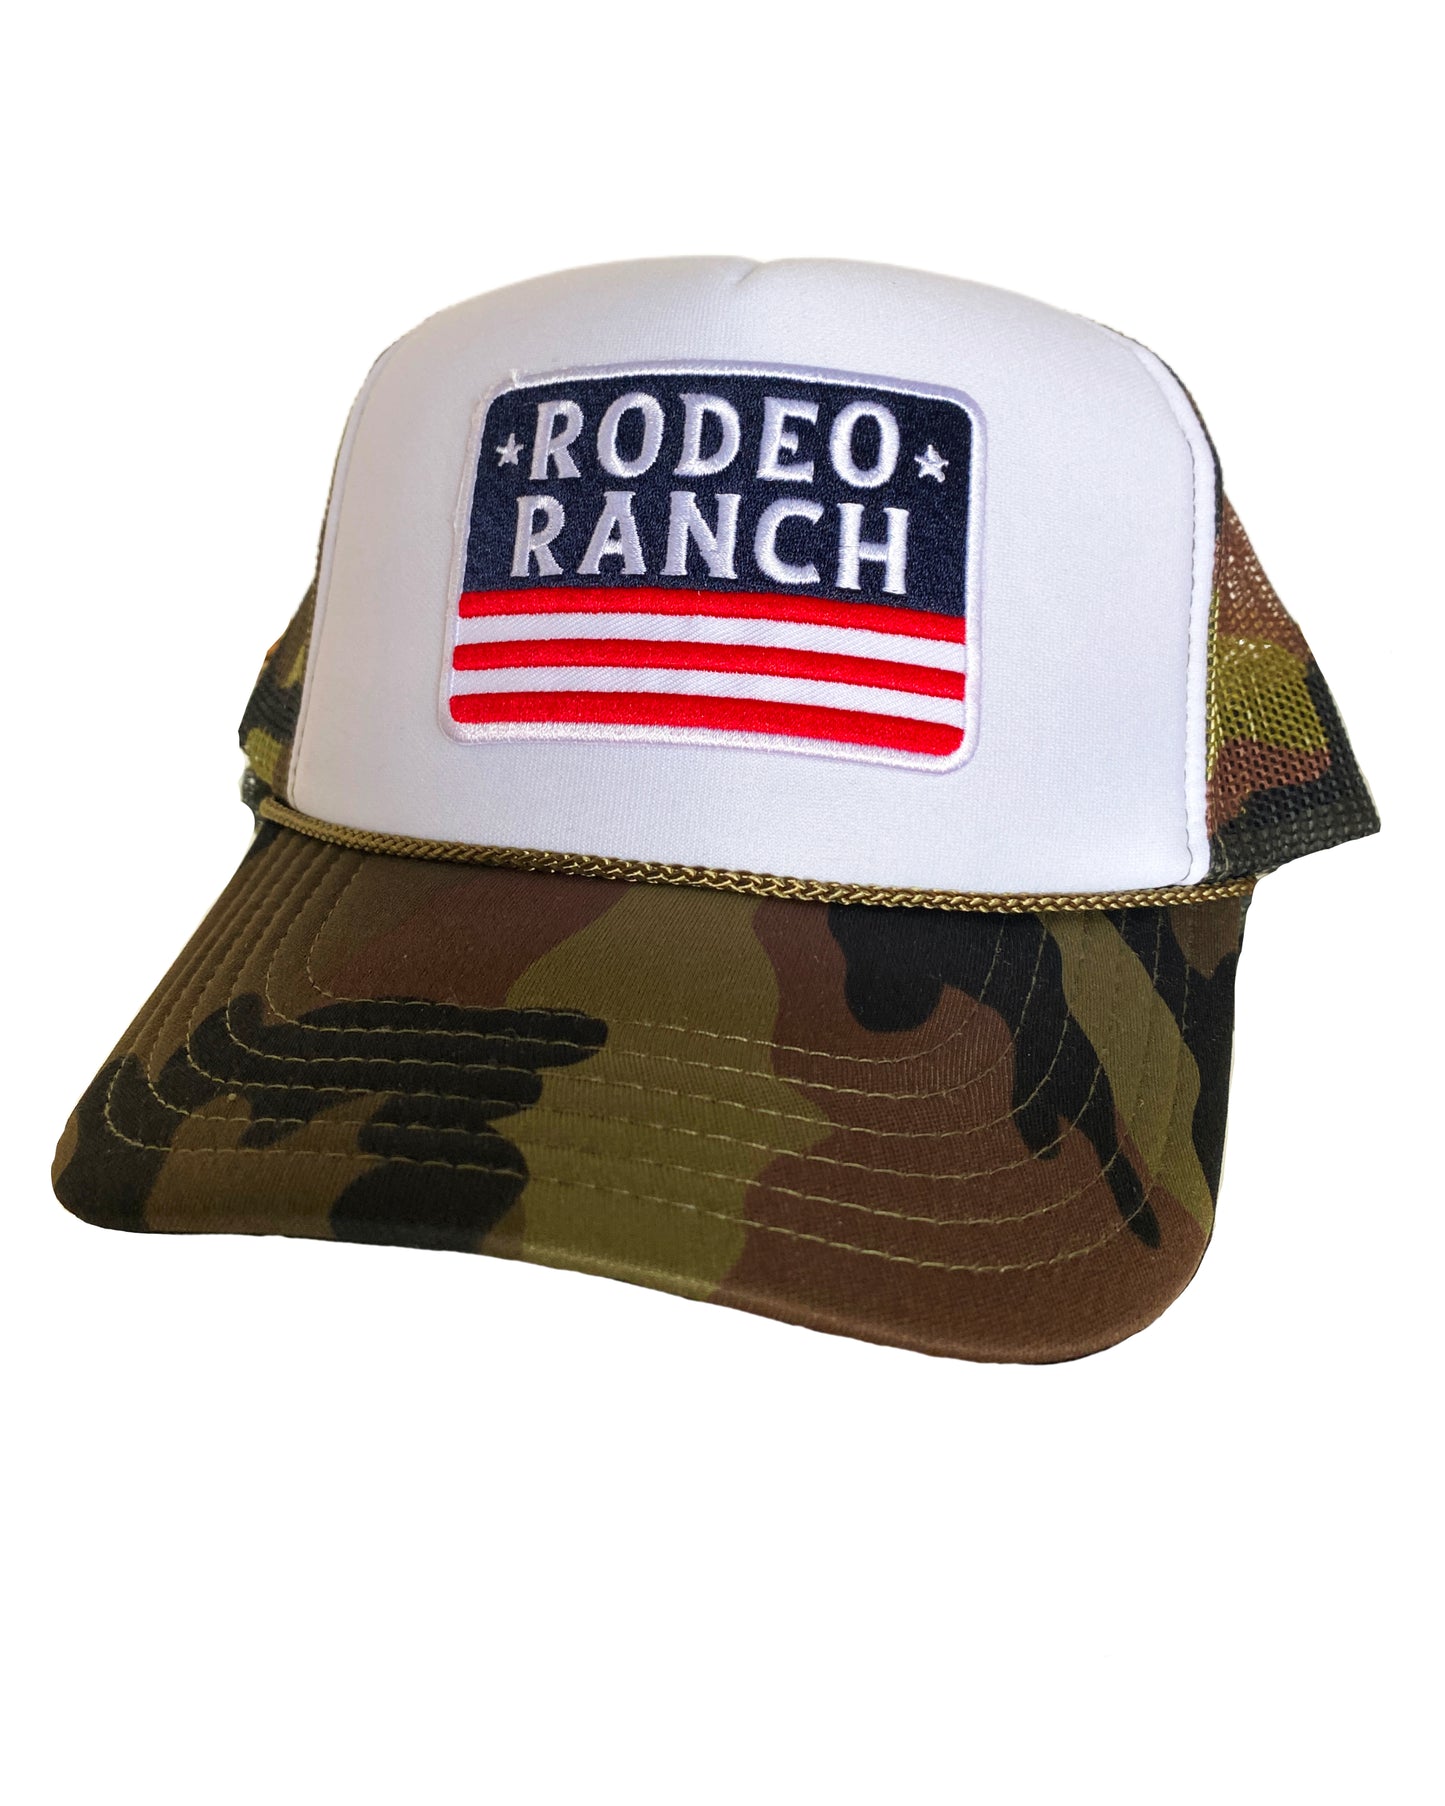 Rodeo Ranch Flag Hat - Camo with White Foam Front